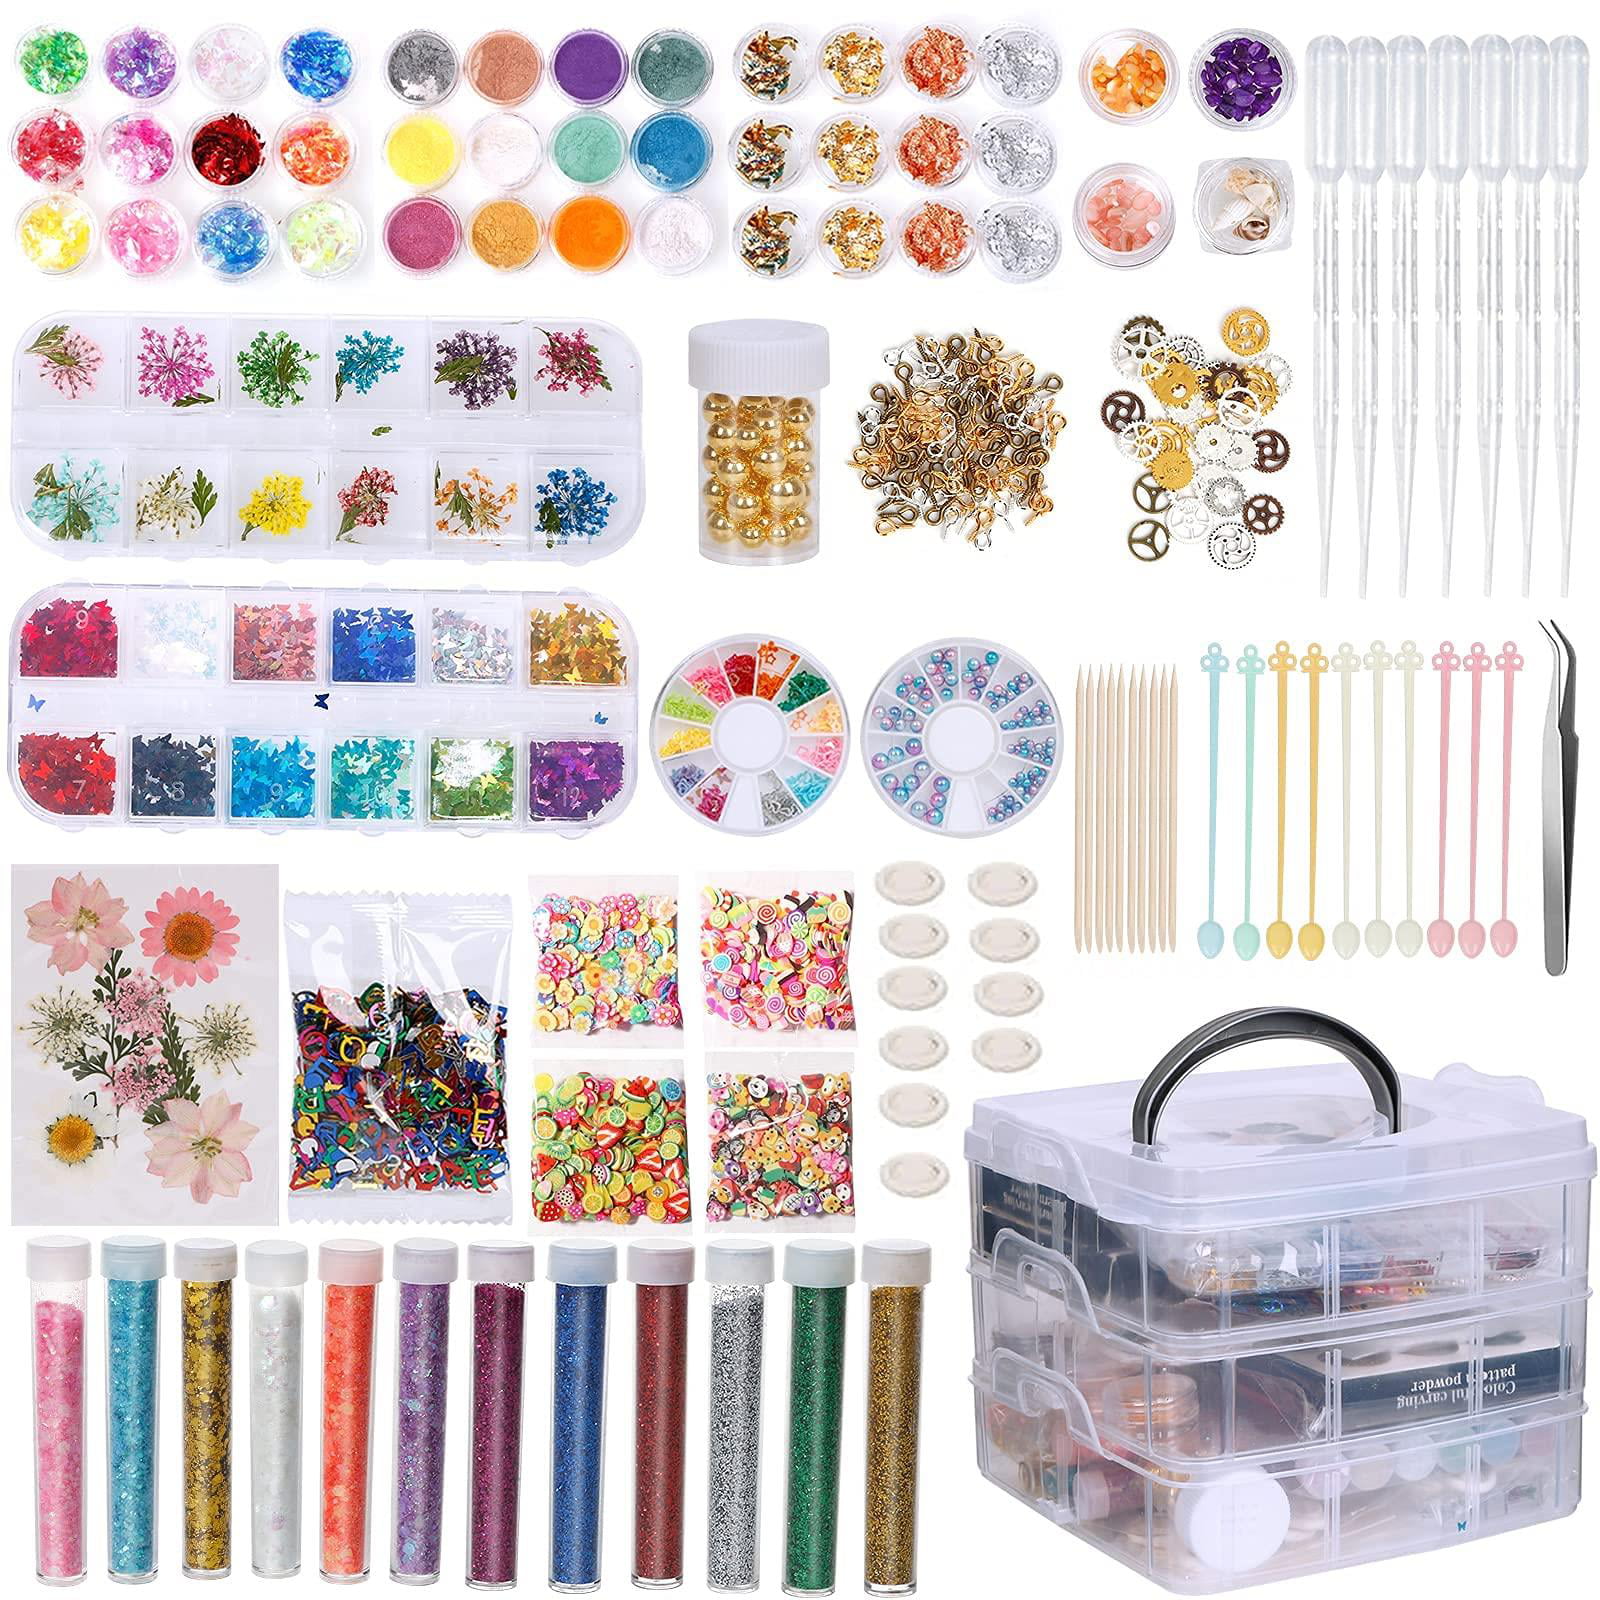 219Pcs Resin Kit for Beginners, Thrilez Resin Mold Kit with Resin Molds  Silicone and Epoxy Resin Supplies Include Dried Flowers, Foil Flakes,  Necklace